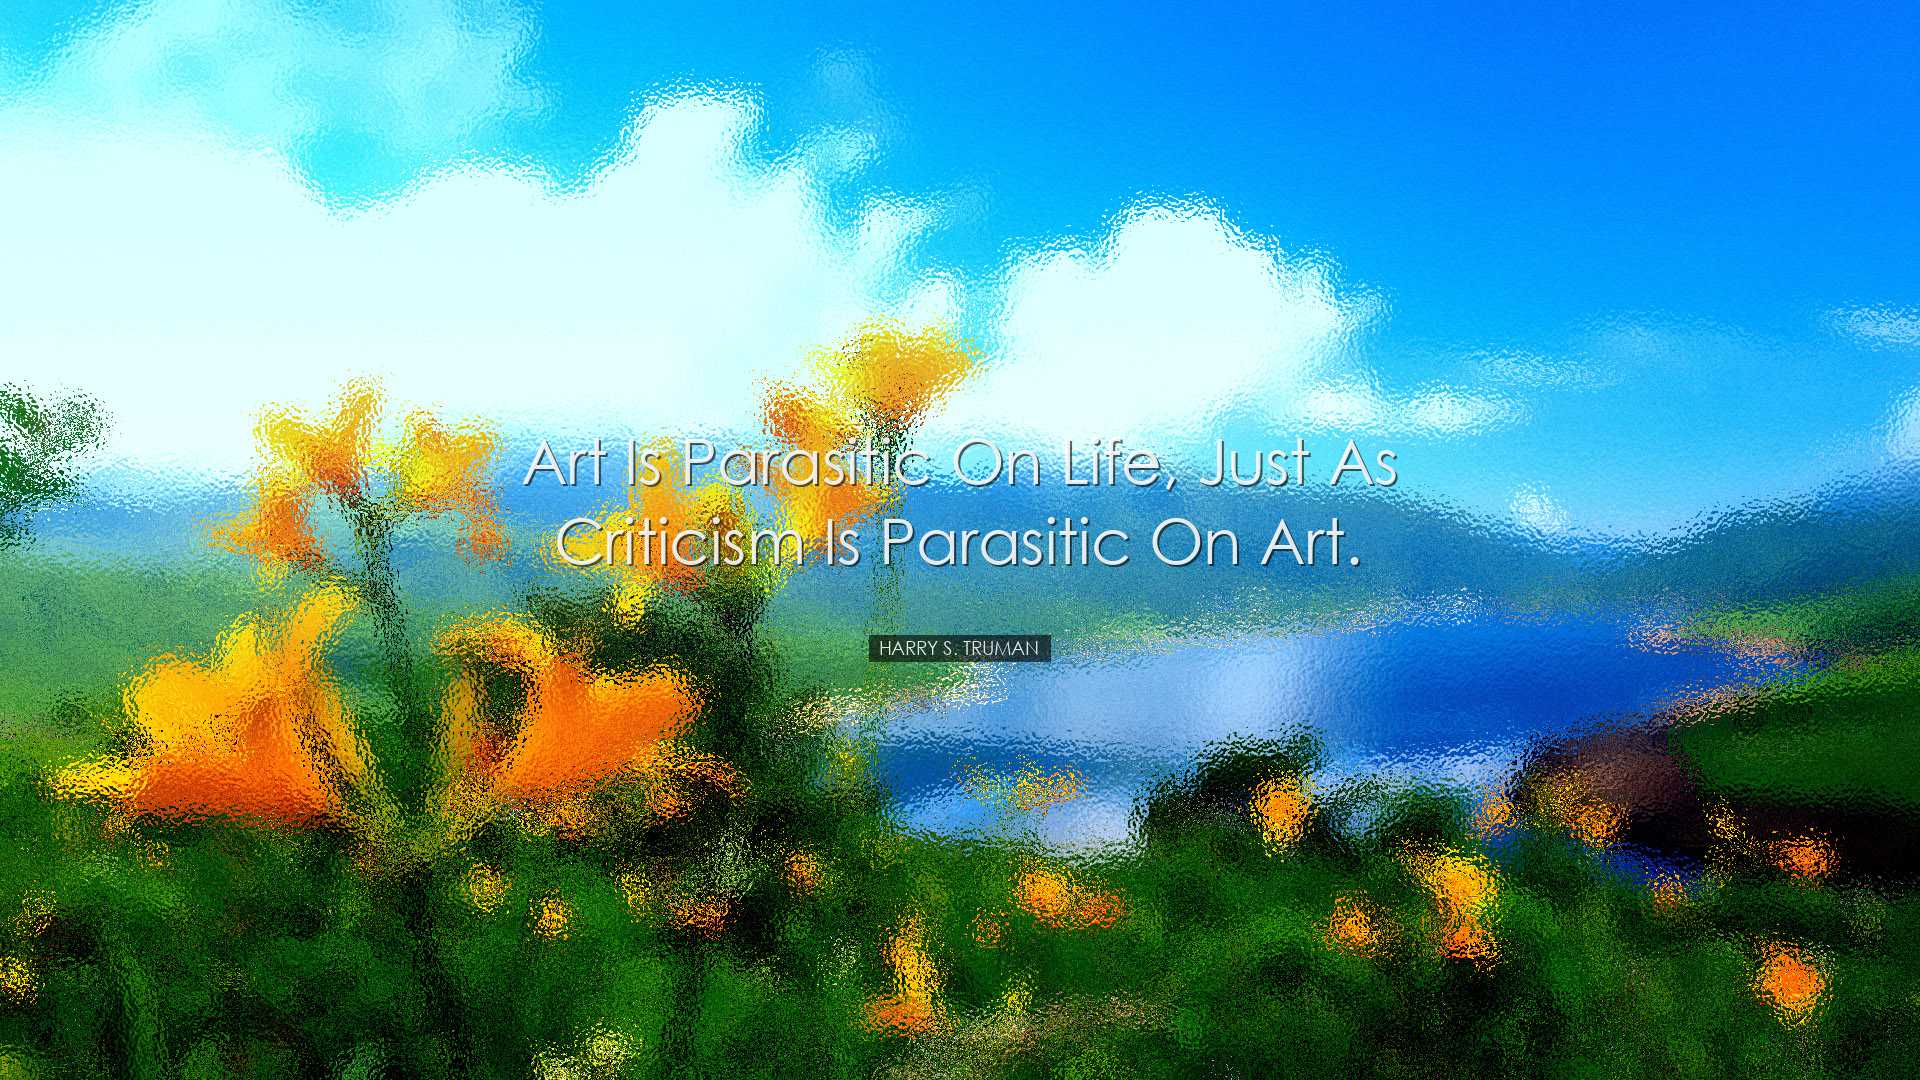 Art is parasitic on life, just as criticism is parasitic on art. -